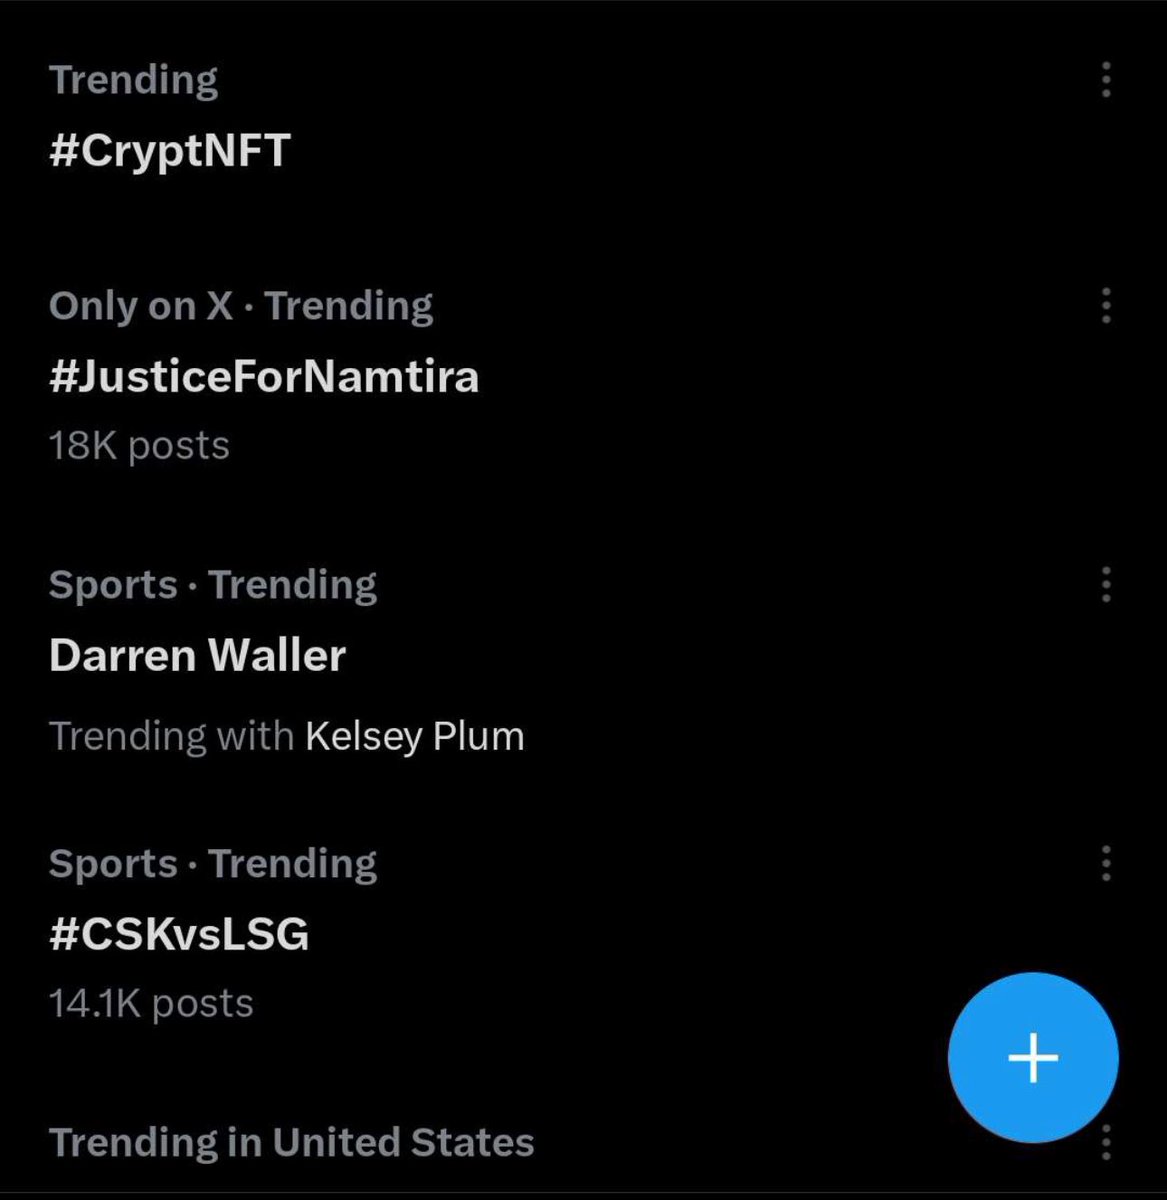 Nice to be Trending #CryptNFT 

It’s the moonshot 🌚